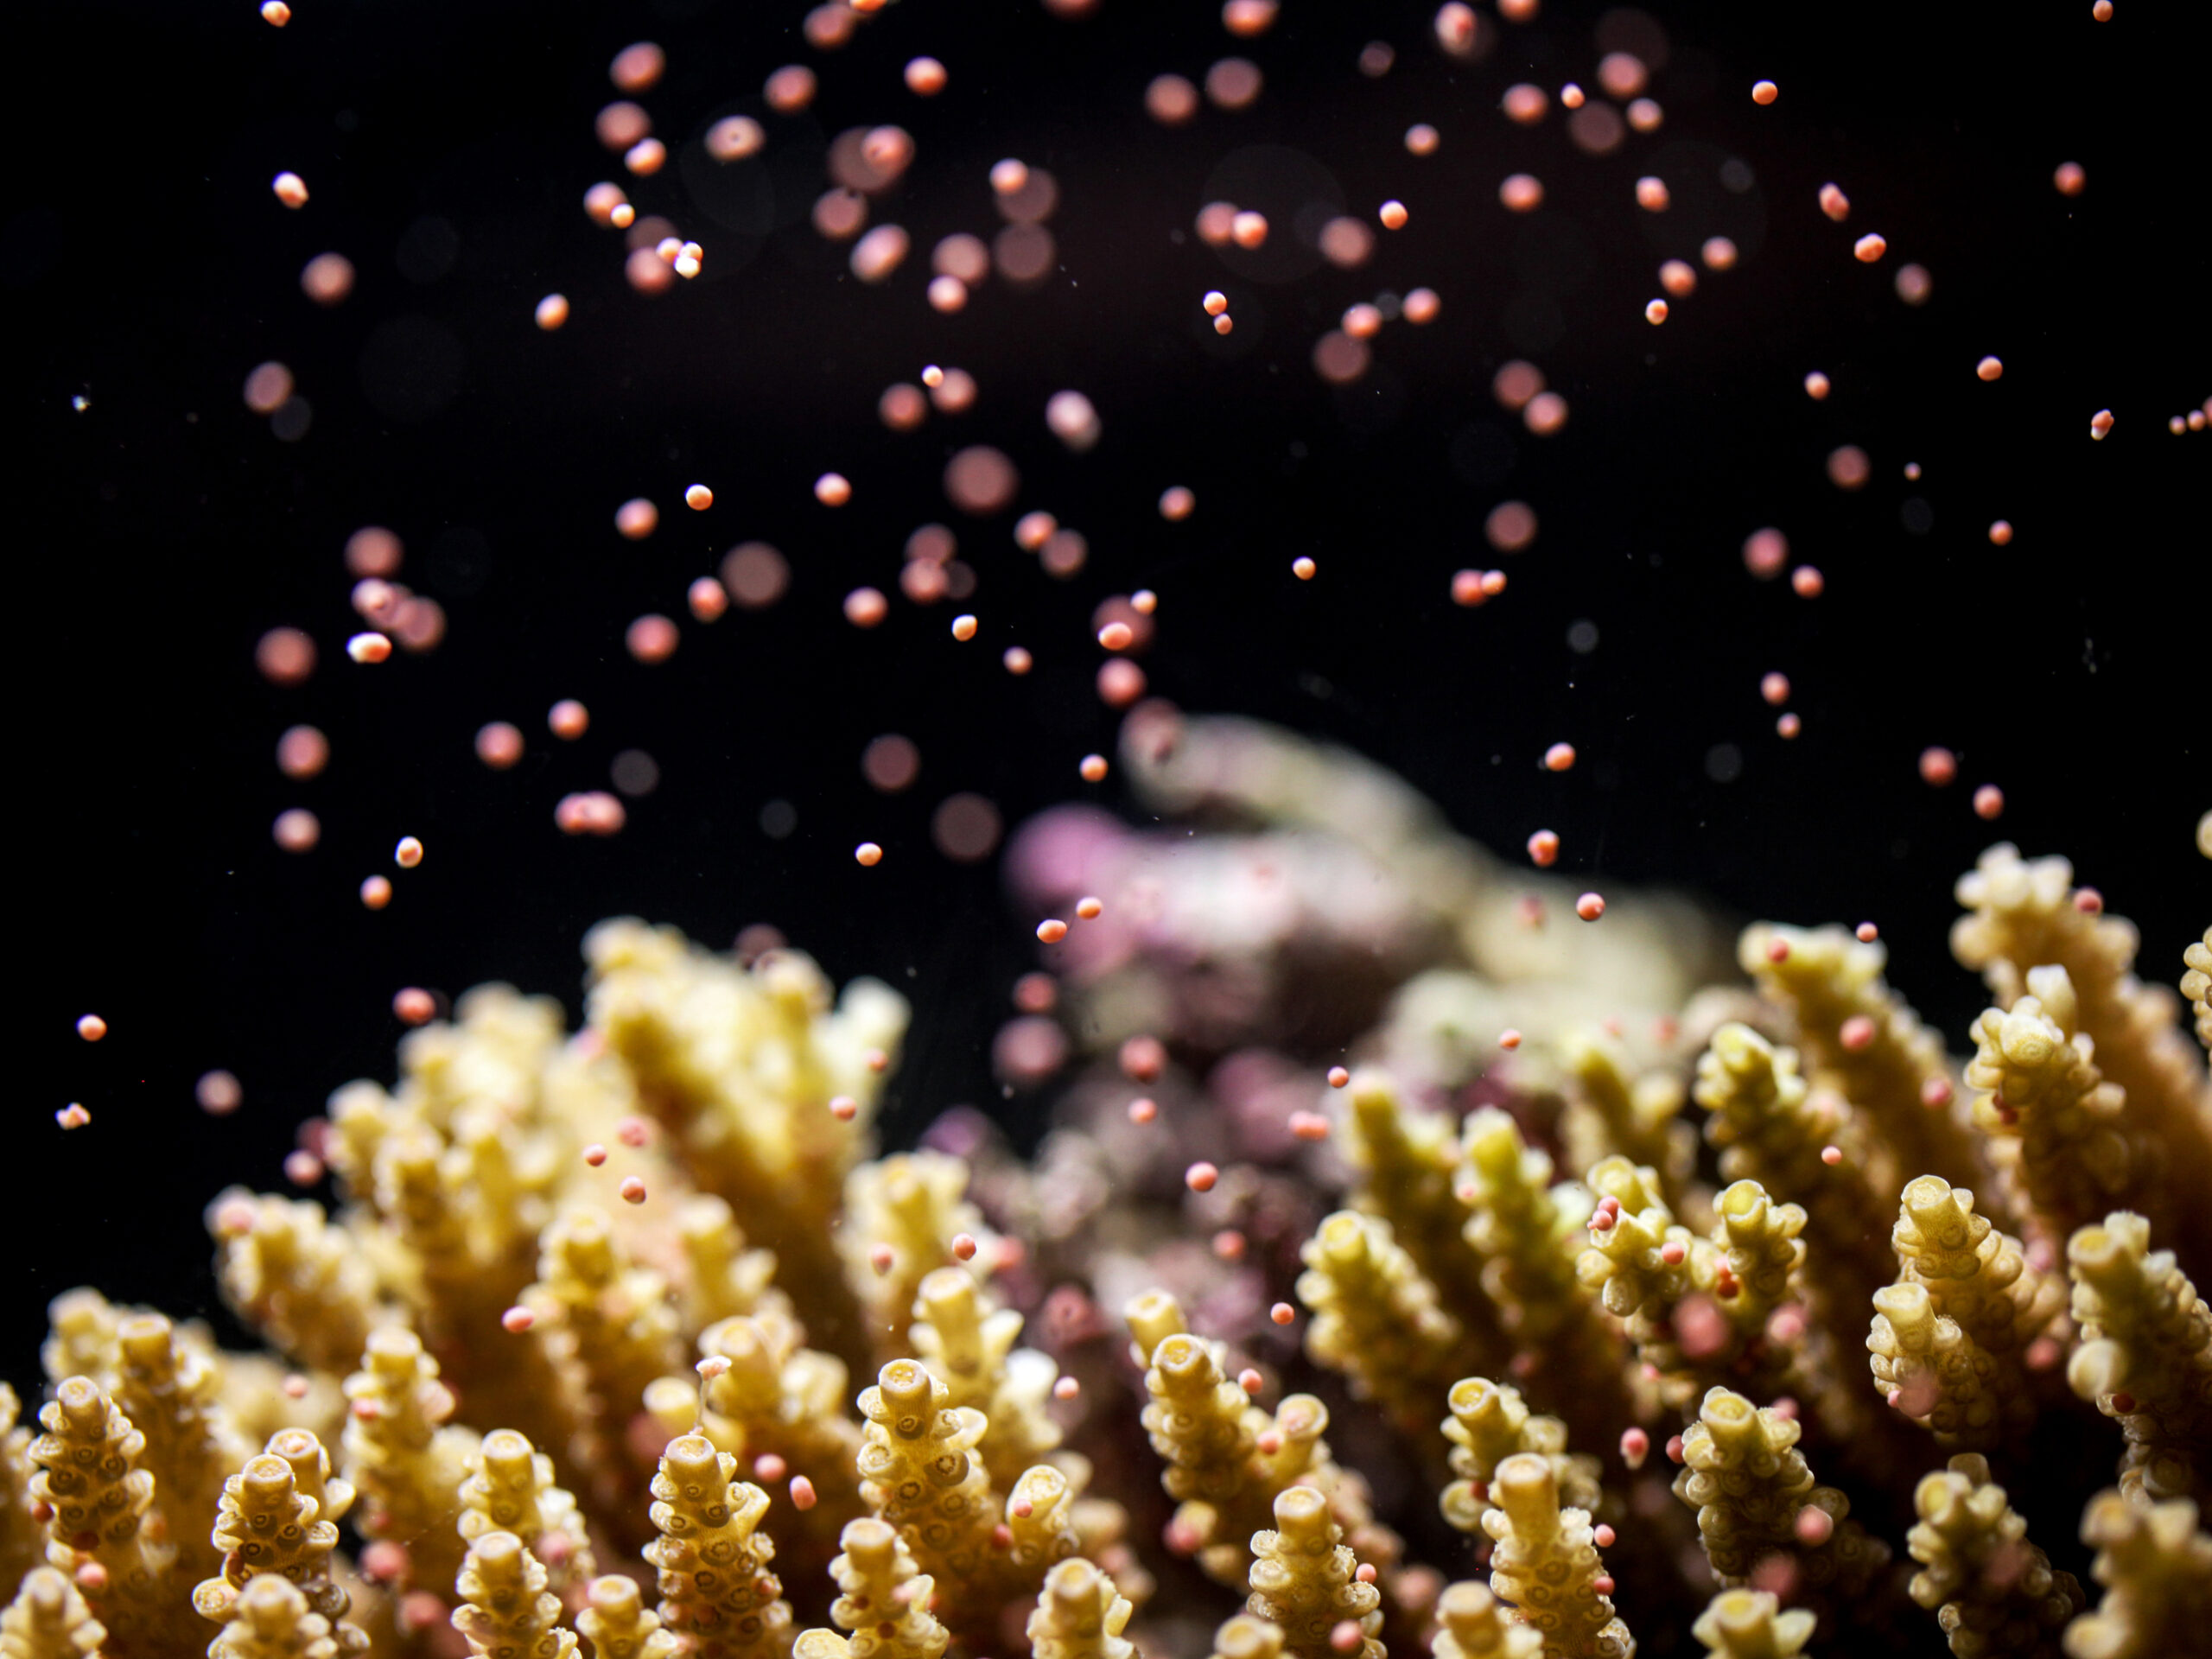 Scientists are breeding ‘super corals.’ Can they withstand climate change?